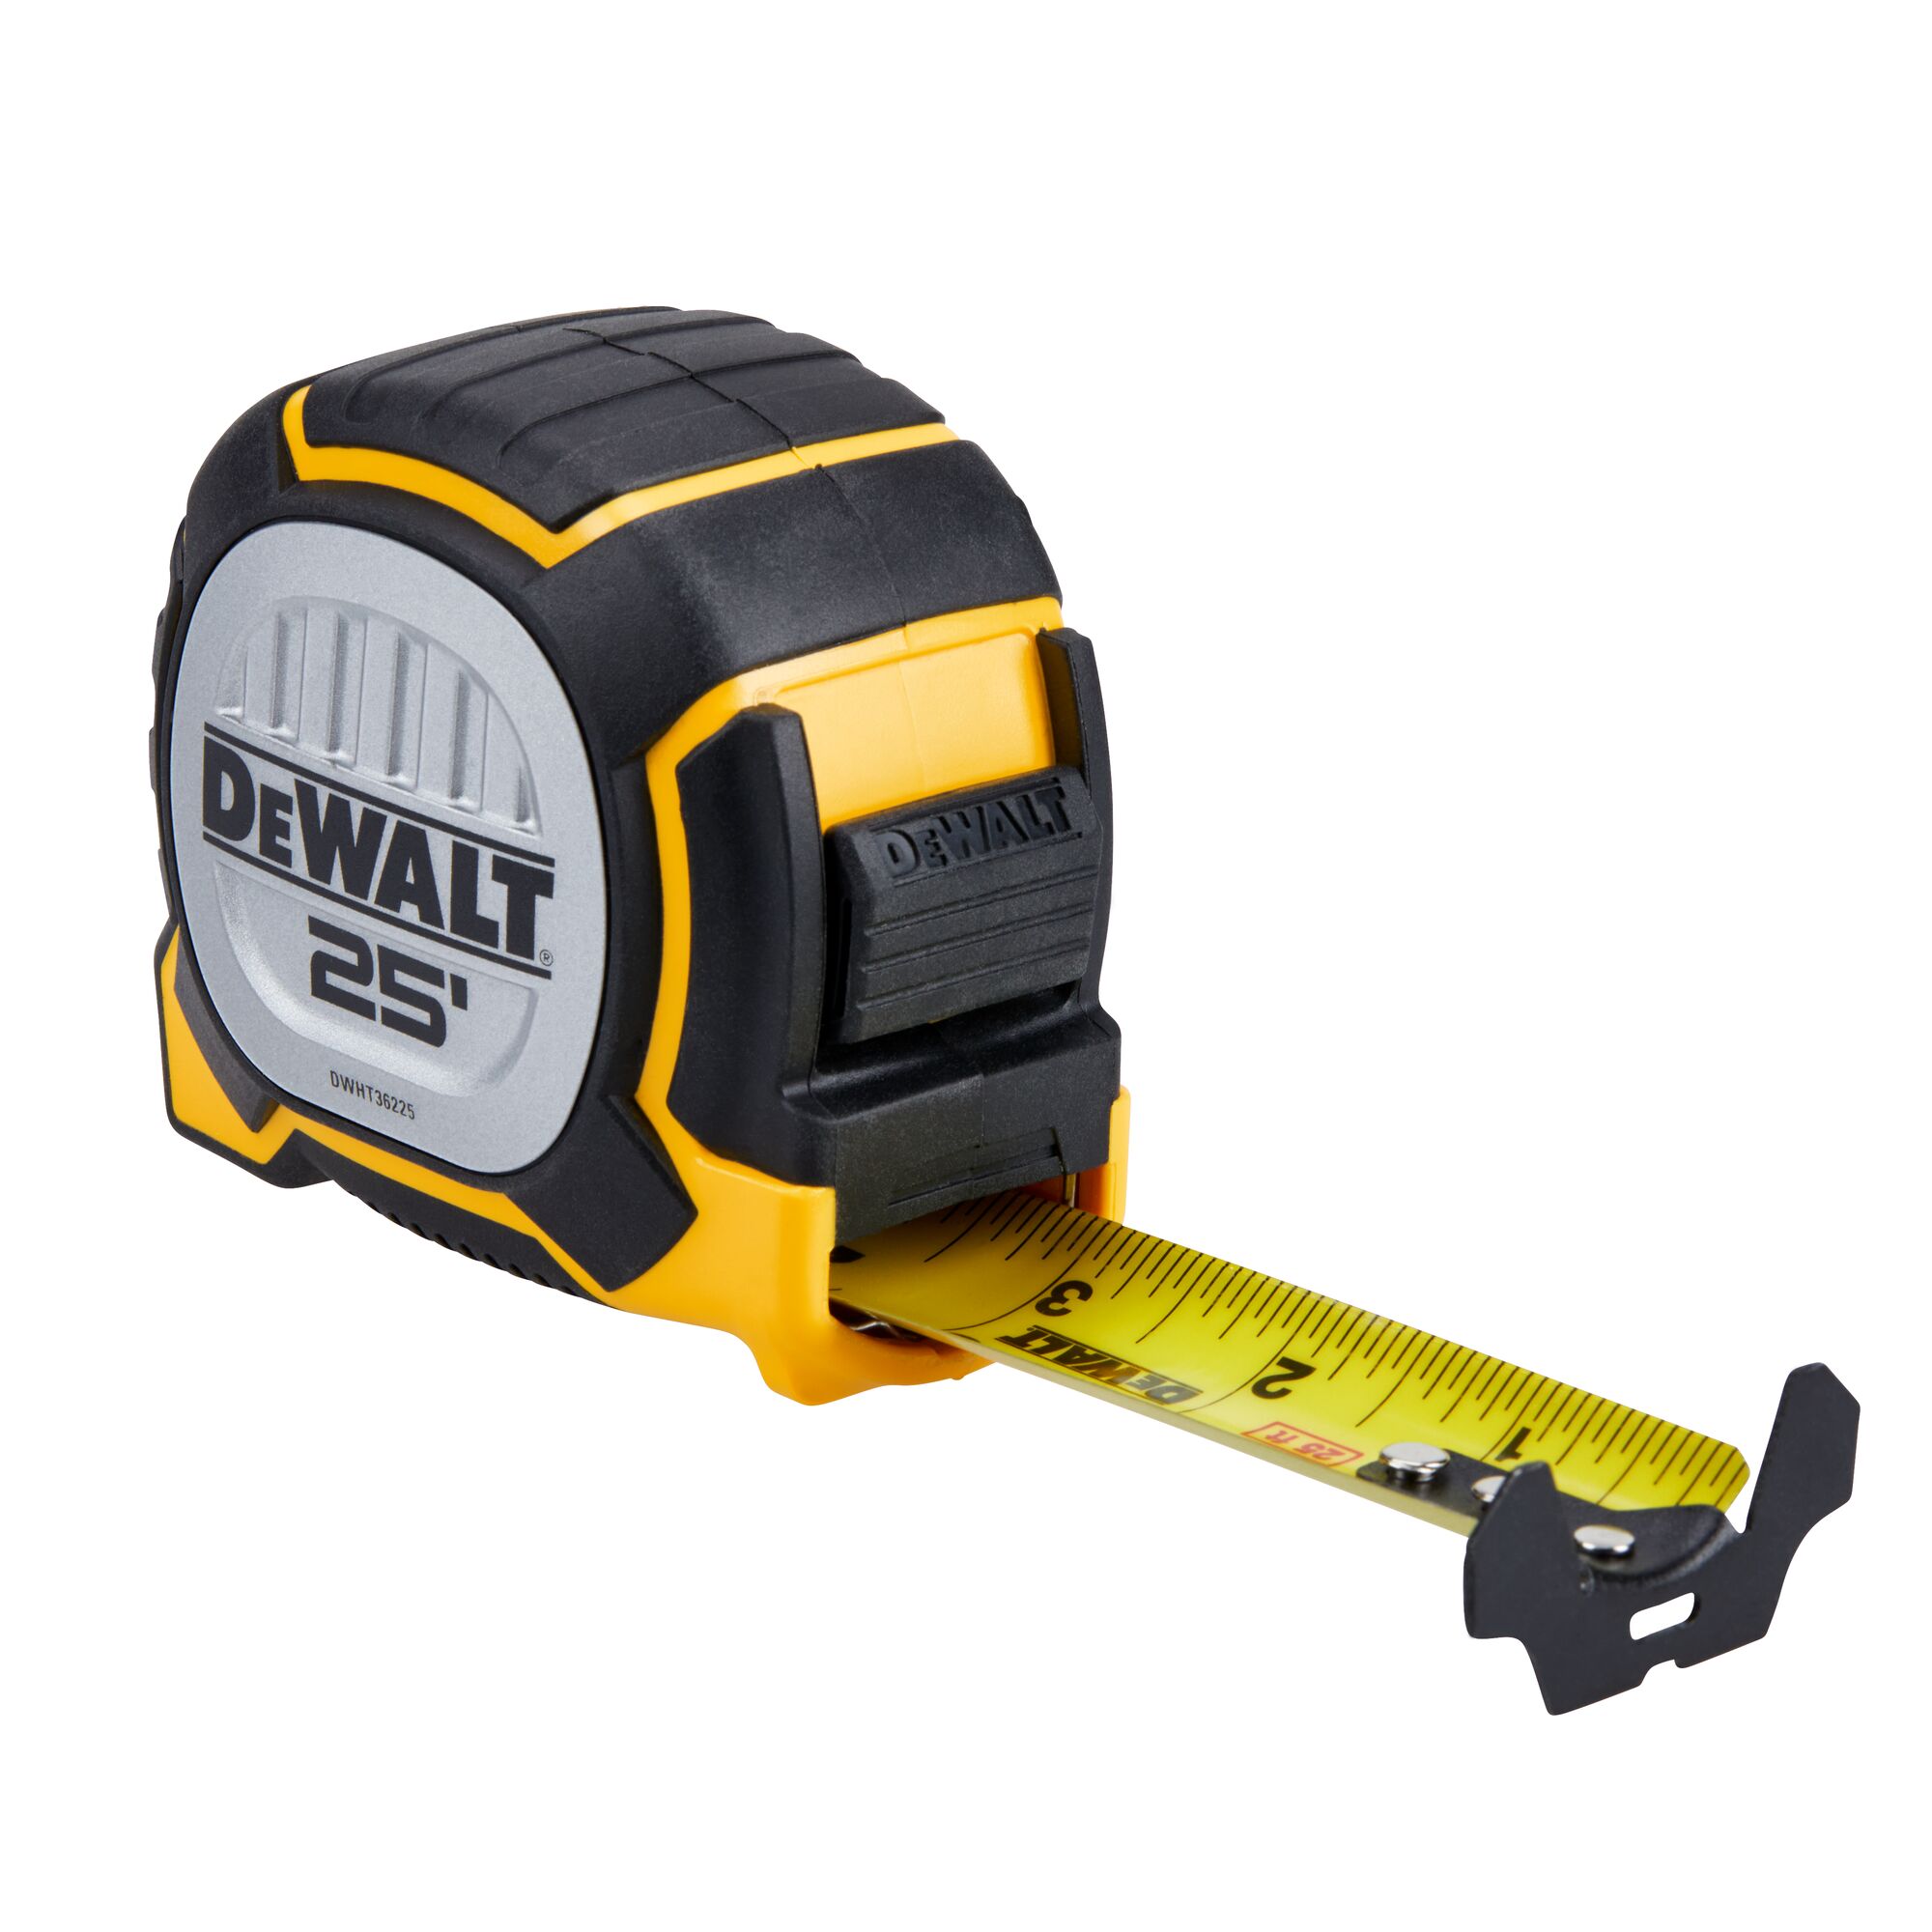 Dewalt DWHT36107 Tape Measure 25 Foot by 1-1/8 Inch With A 13 Foot Standout 